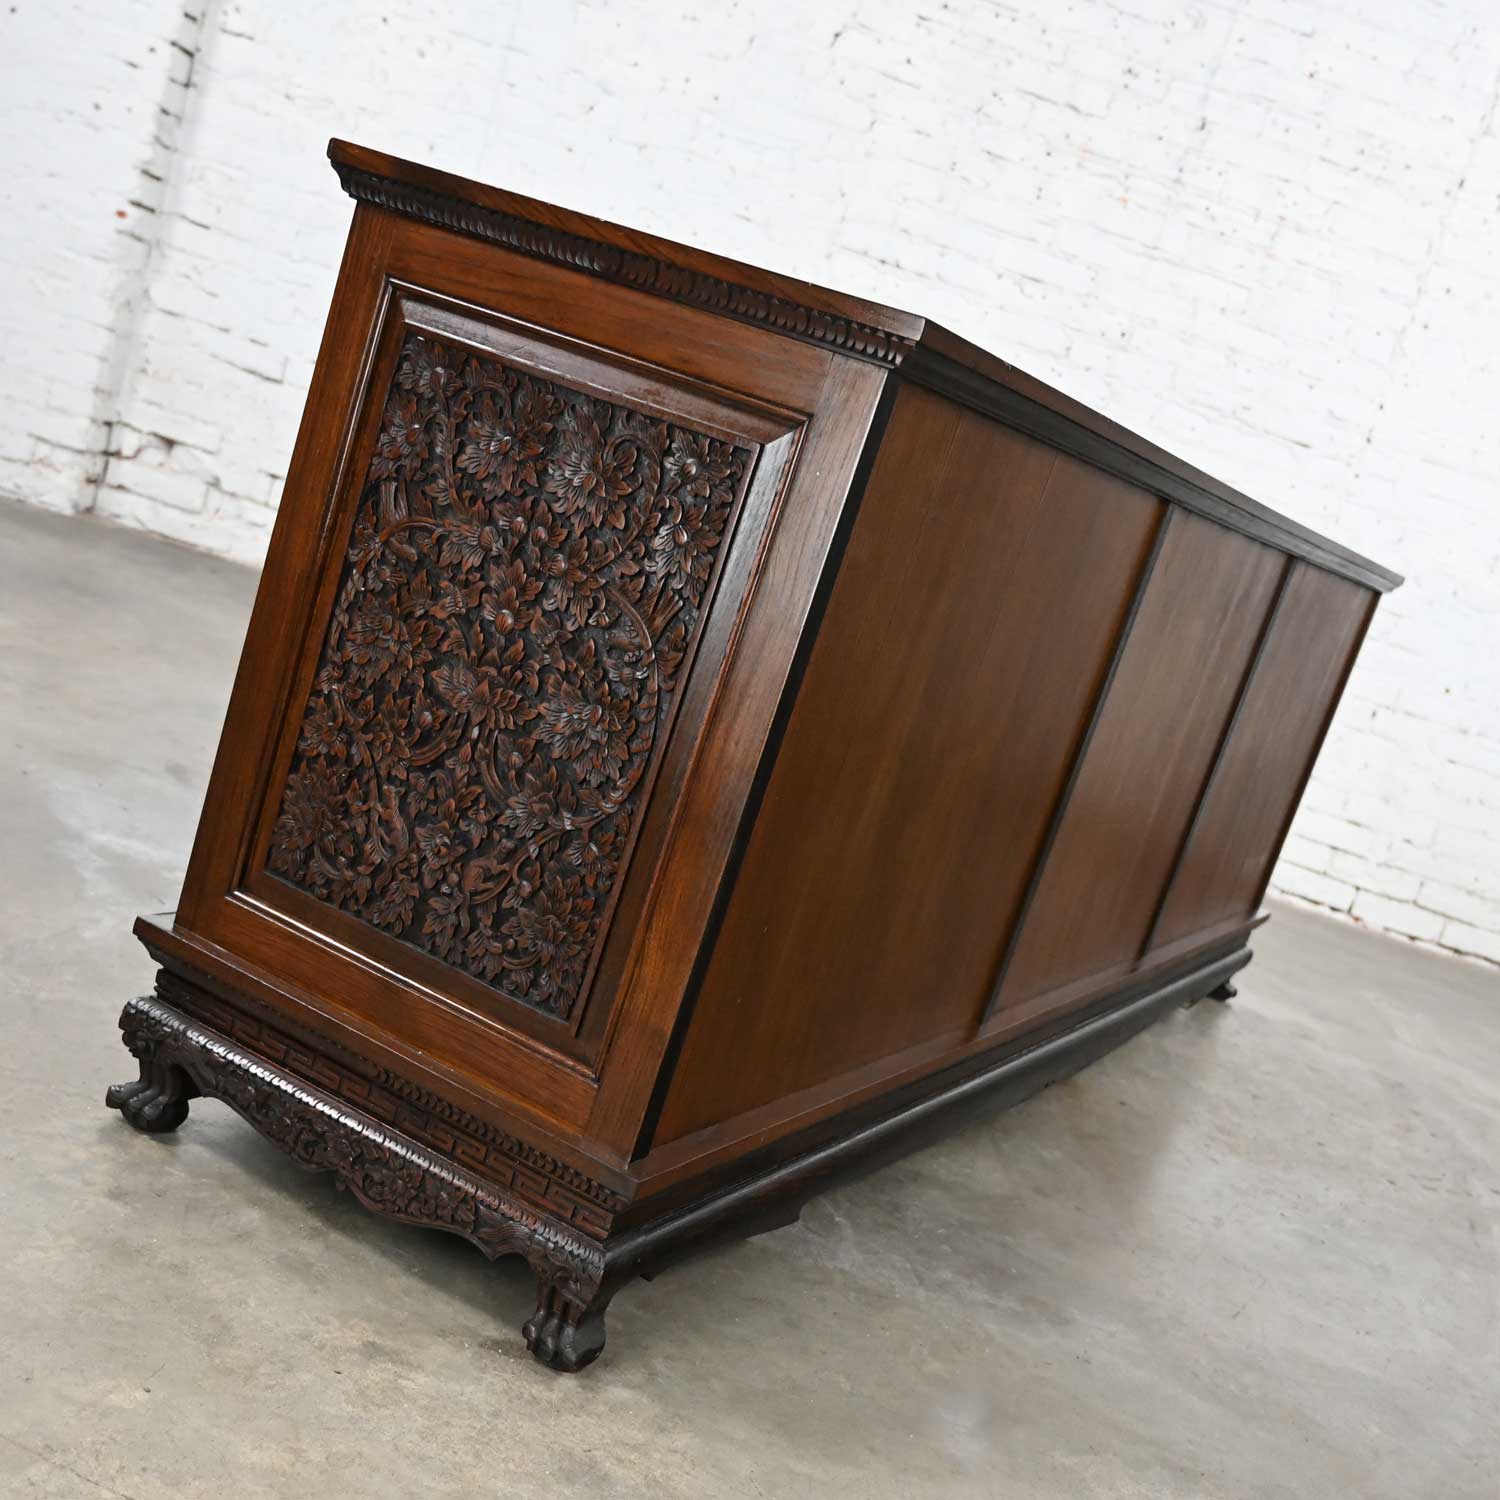 Vintage Chinoiserie Hand Carved Rosewood Credenza Buffet Cabinet from Bangkok Thailand